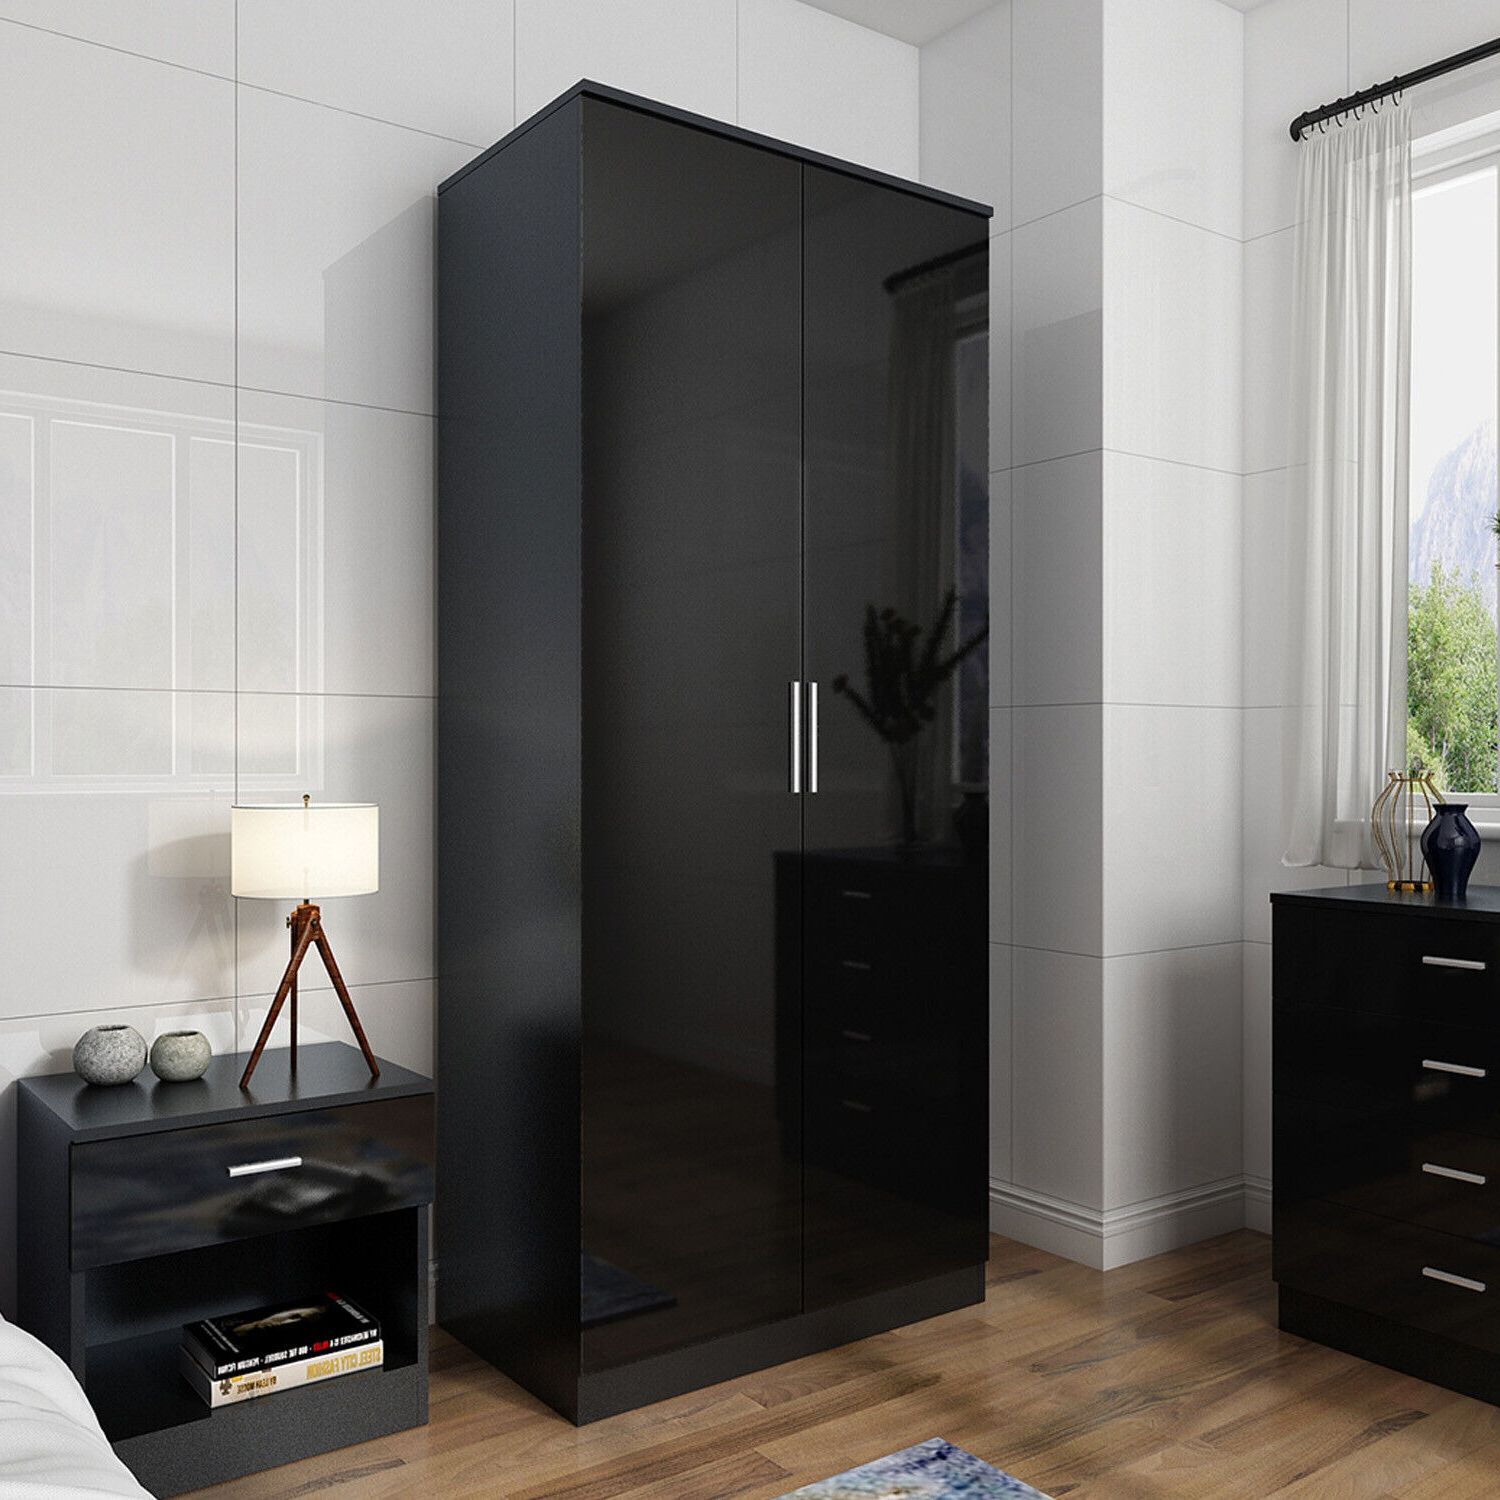 2 Door Wardrobe With Mirror Bedroom Furniture High Gloss Large Storage  Closet | Ebay In Black High Gloss Wardrobes (View 4 of 20)